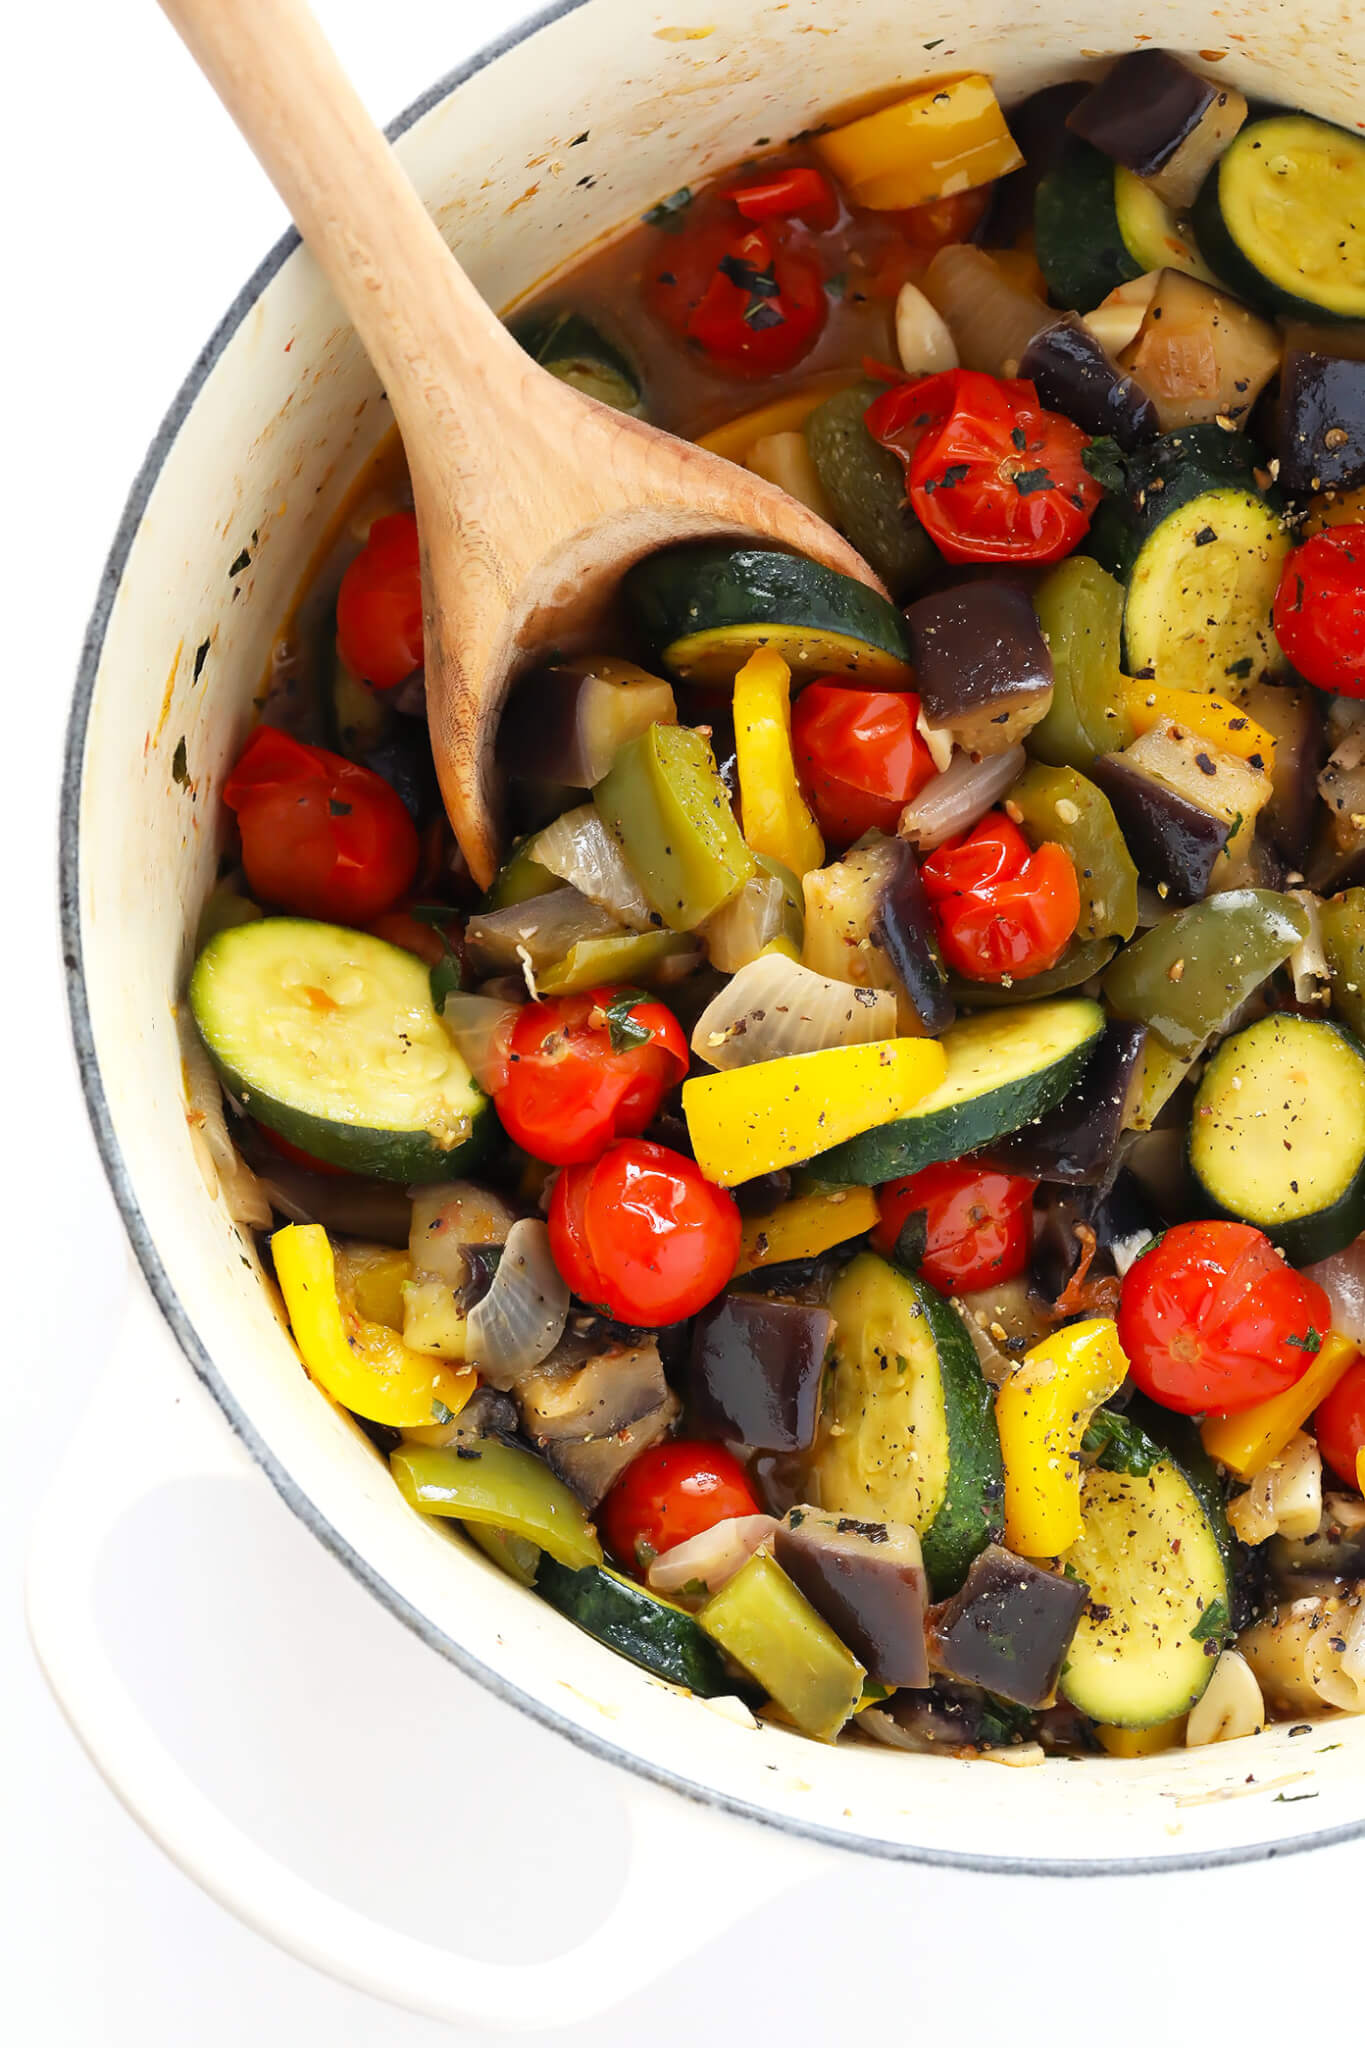 This ultra-easy Ratatouille recipe is the perfect way to use up summer vegetables (zucchini, eggplant, tomato, bell peppers, you name it!), and tastes absolutely delicious when served with crusty French bread (or pasta or quinoa or rice). An awesome healthy dinner idea, and one that's easy to customize with your favorite ingredients. | gimmesomeoven.com (Gluten-Free / Vegetarian / Vegan)